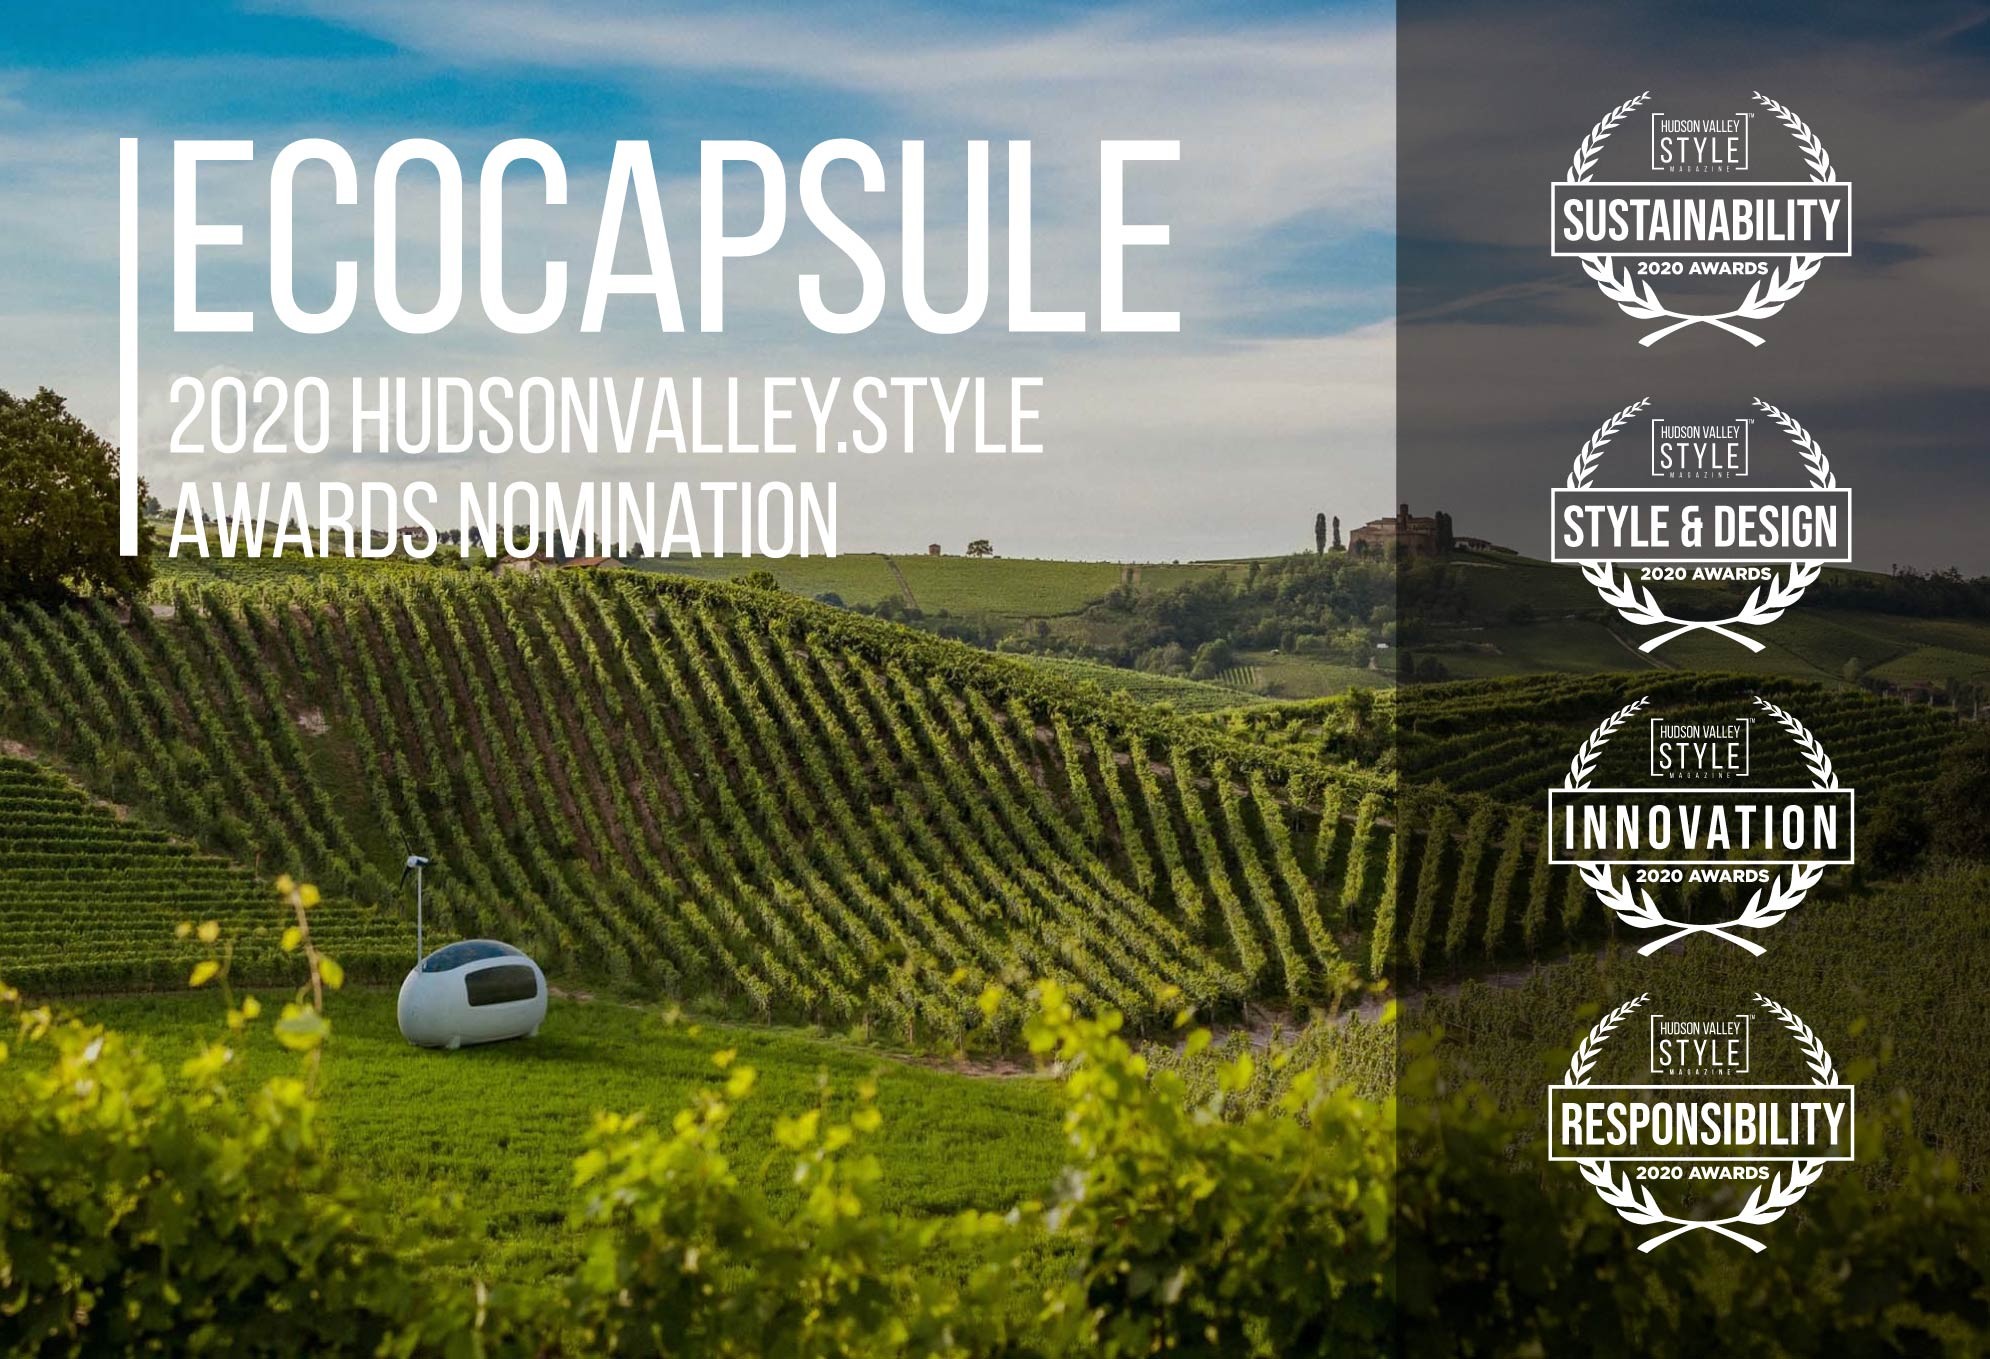 2020 Hudson Valley Style Magazine Awards Nomination: EcoCapsule - Sustainable off-grid micro-home - Sustainability and Social Responsibility